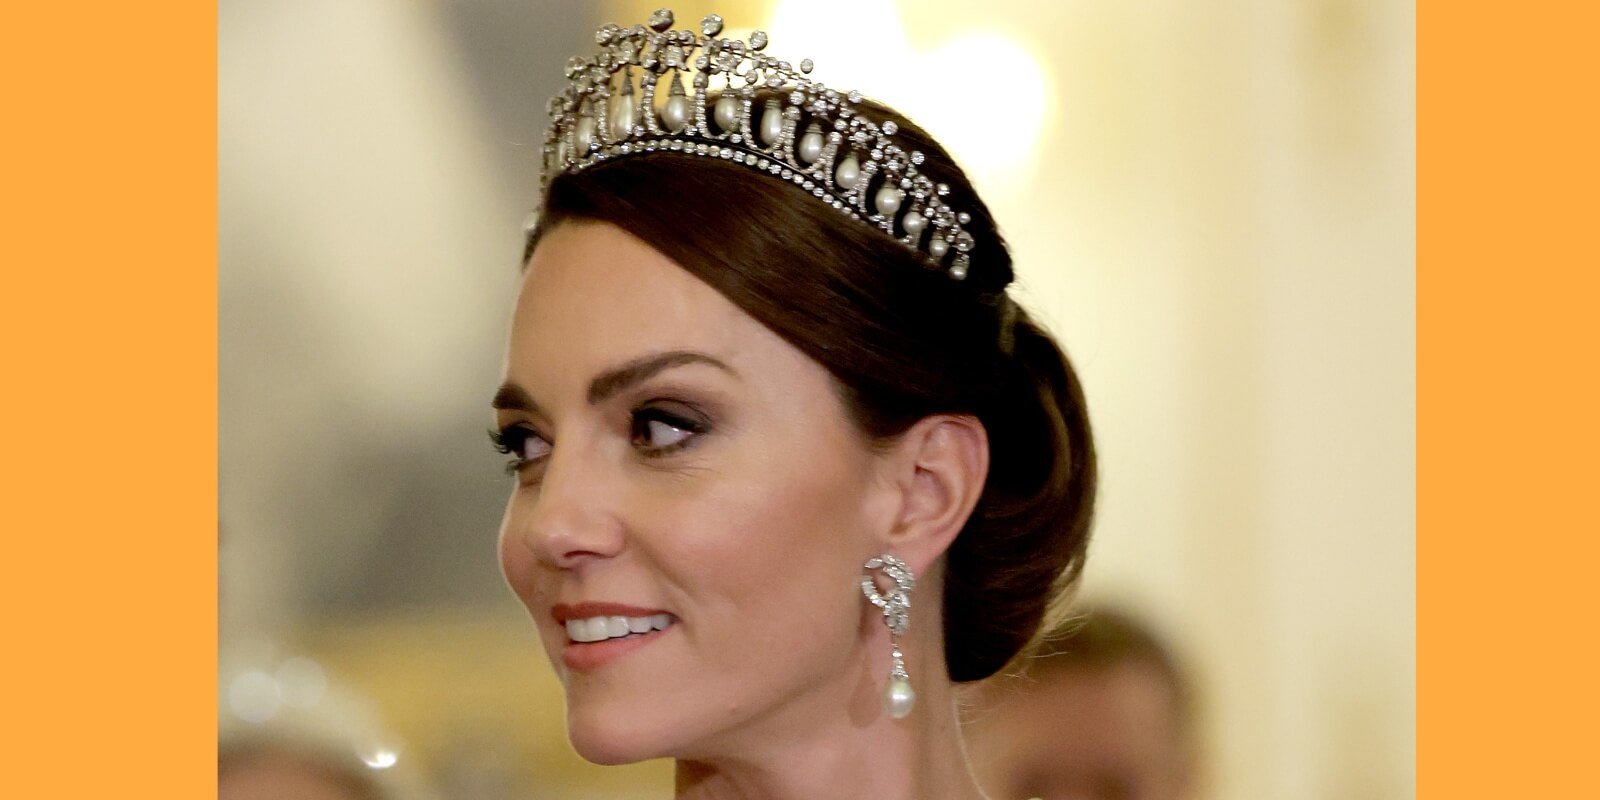 Kate Middleton wears Princess Diana's favorite tiara, the Queen Mary Lovers Knot, at a royal event.